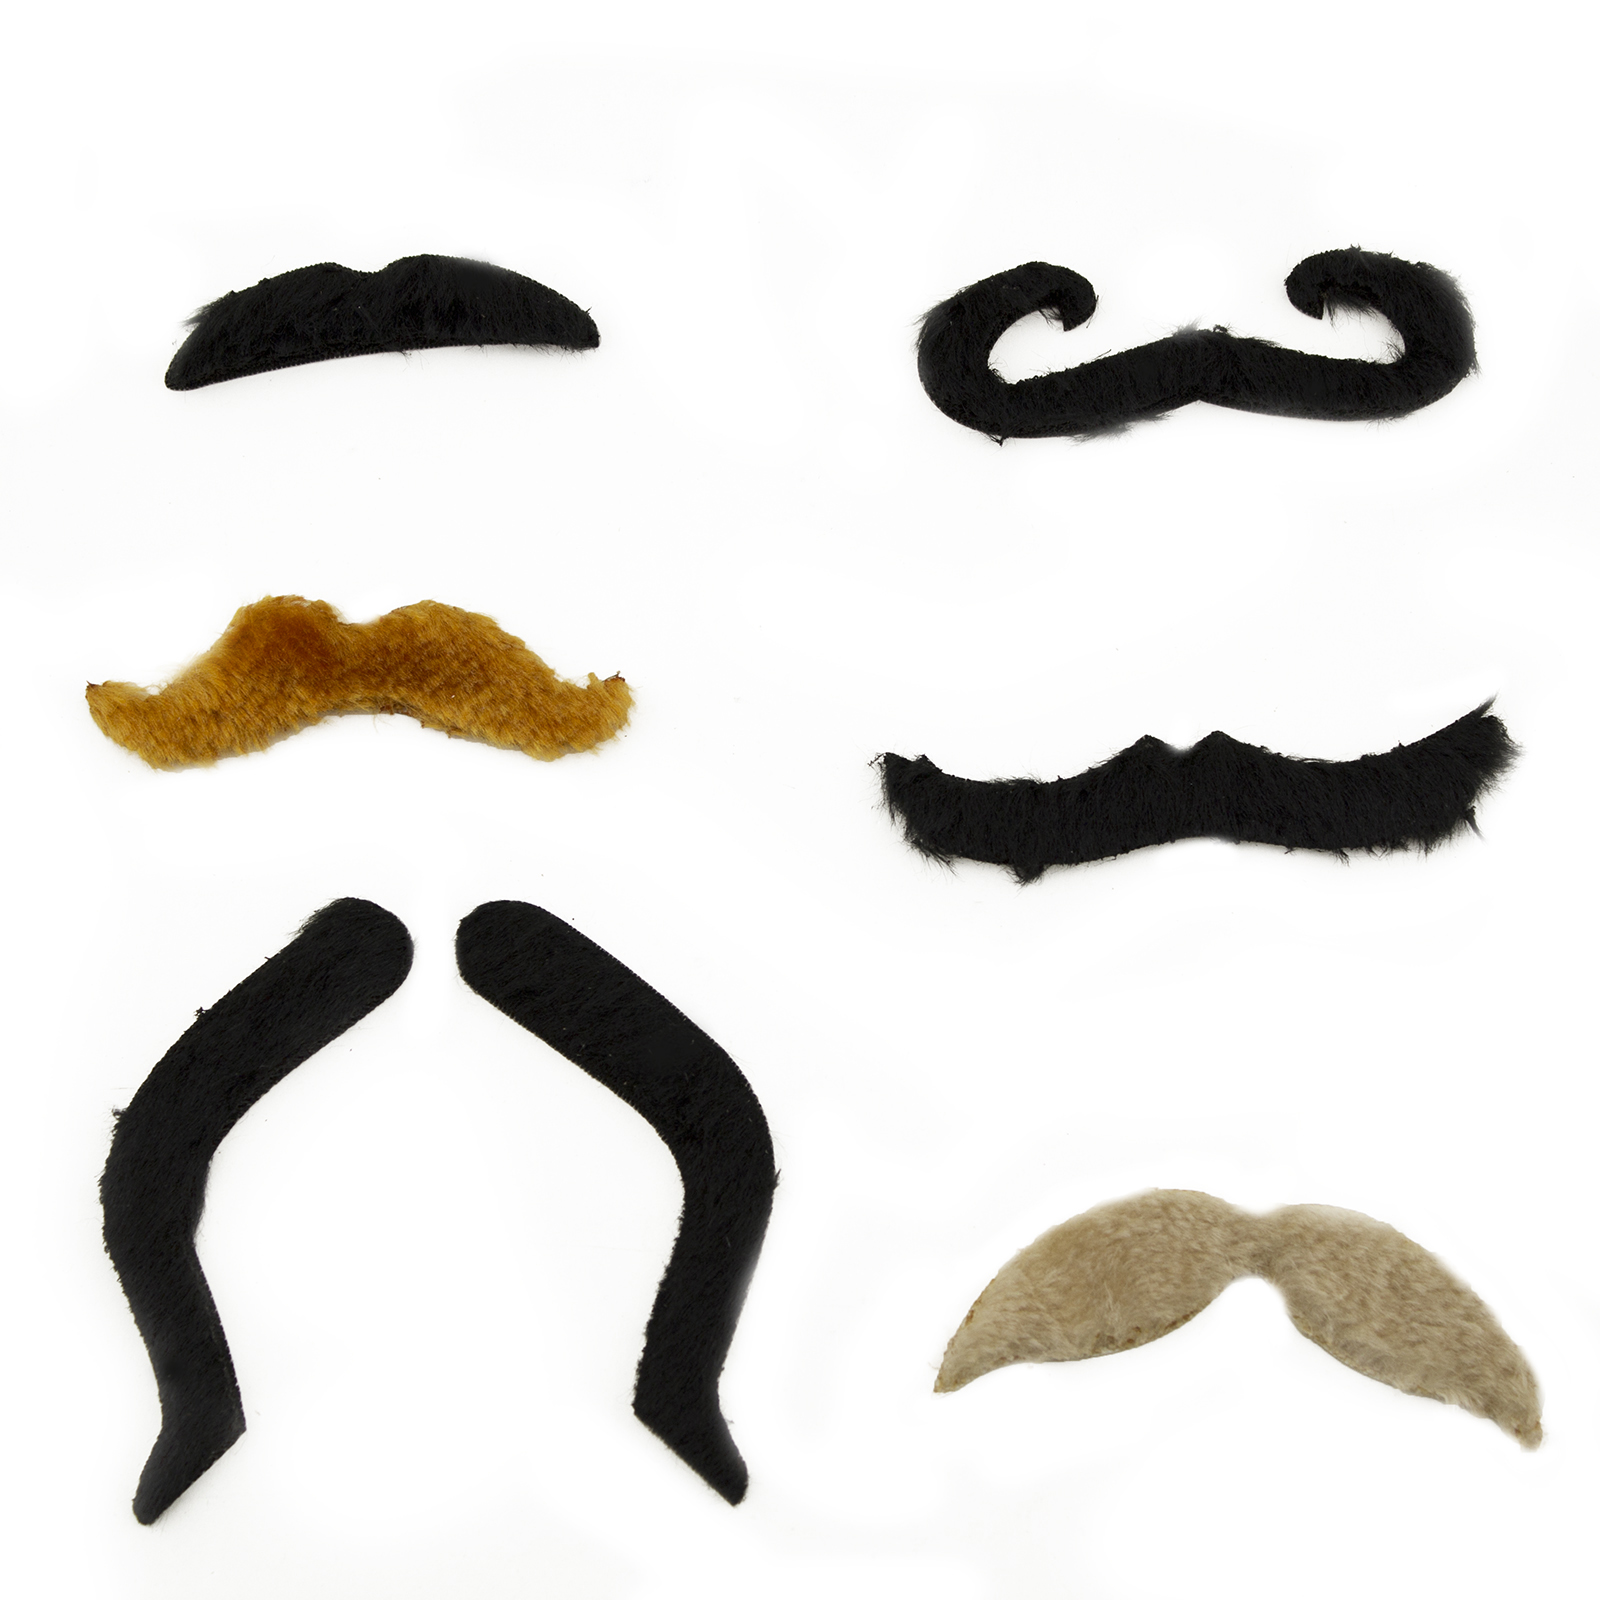 6pc Self Adhesive Fake Mustache Set Novelty Mustaches Halloween Costume Party Ebay